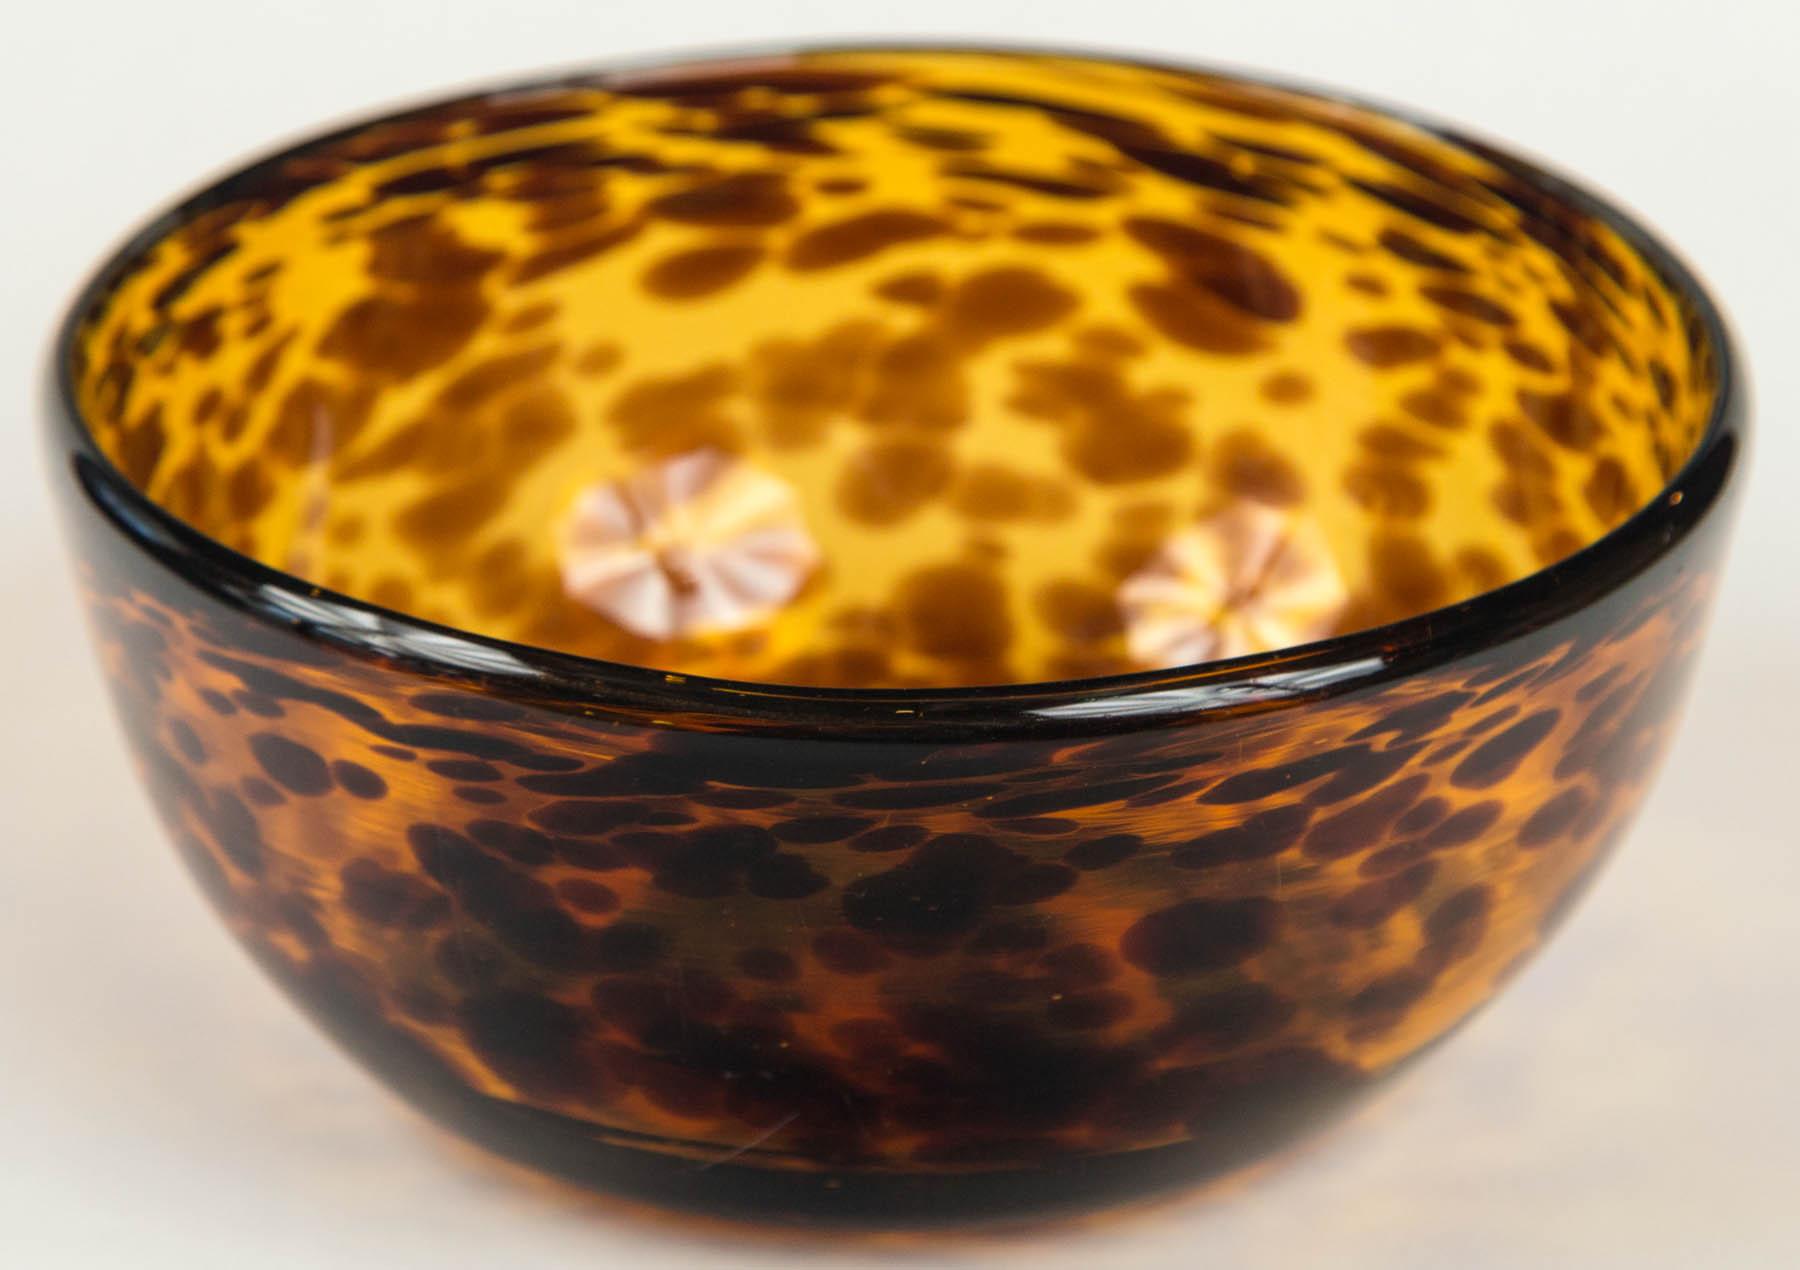 Tortoise shell art glass bowl, circa 1900, England. Tortoise shell art glass was patented in London in 1880 by Francis Pohl and S.A. Whitman. It is created by two layers of hand blown glass with pieces of light and dark brown glass between.